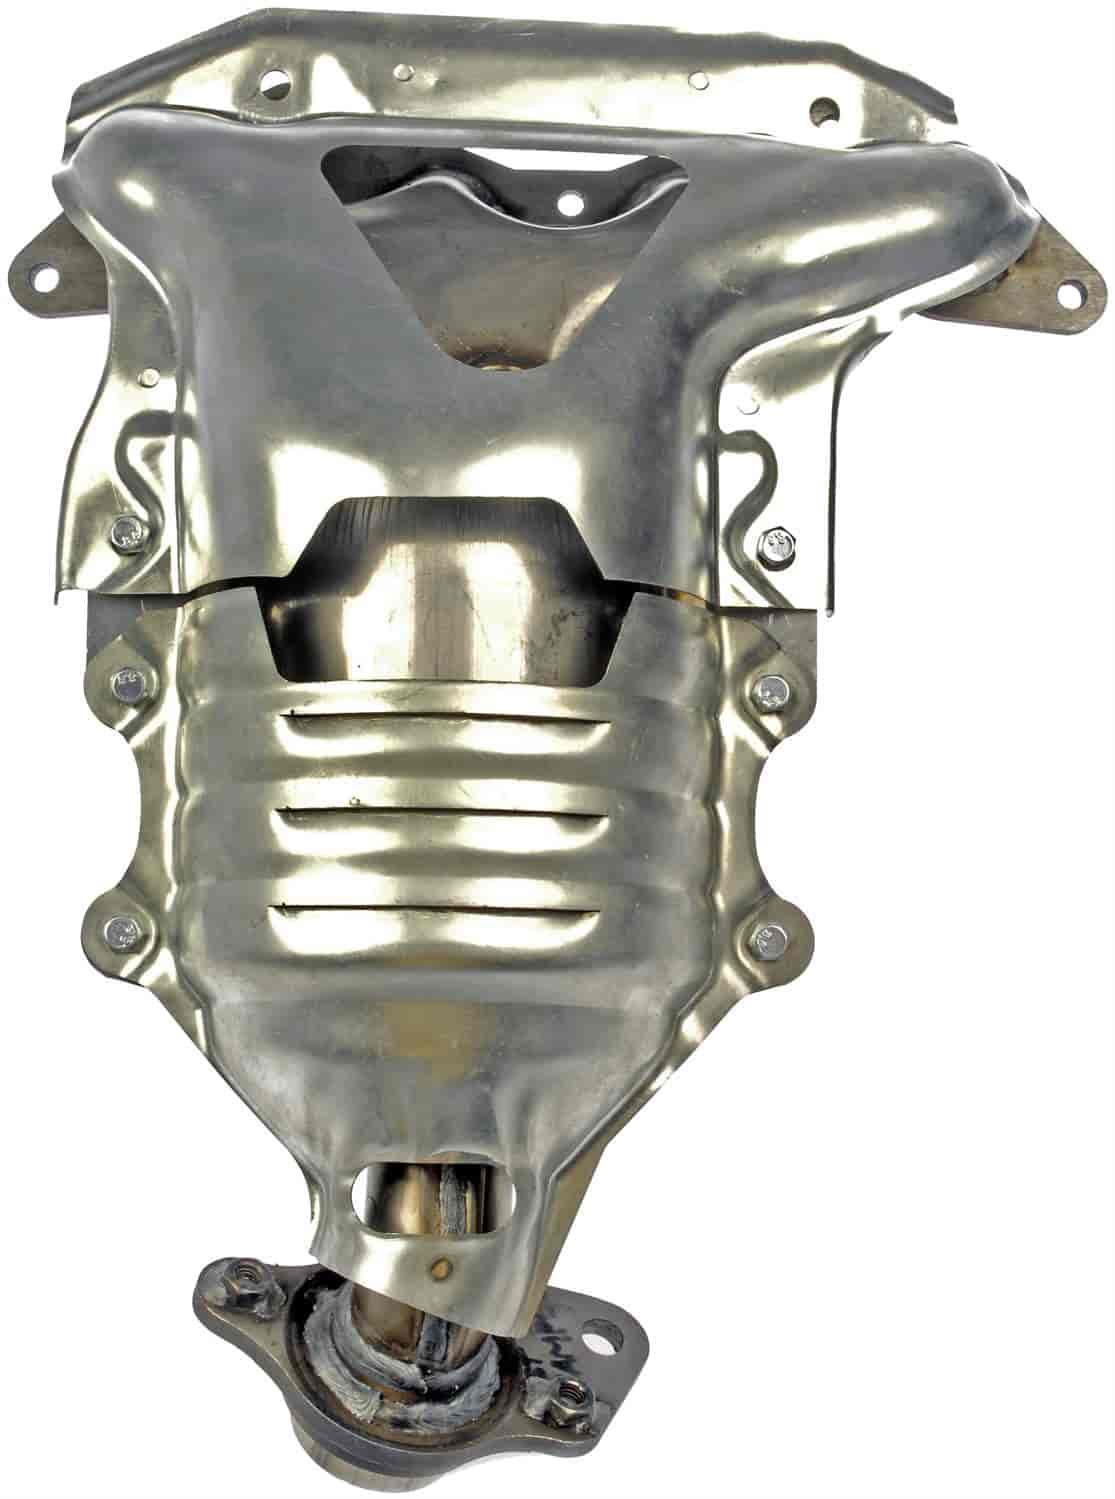 Manifold Converter - Carb Compliant - For Legal Sale In NY - CA